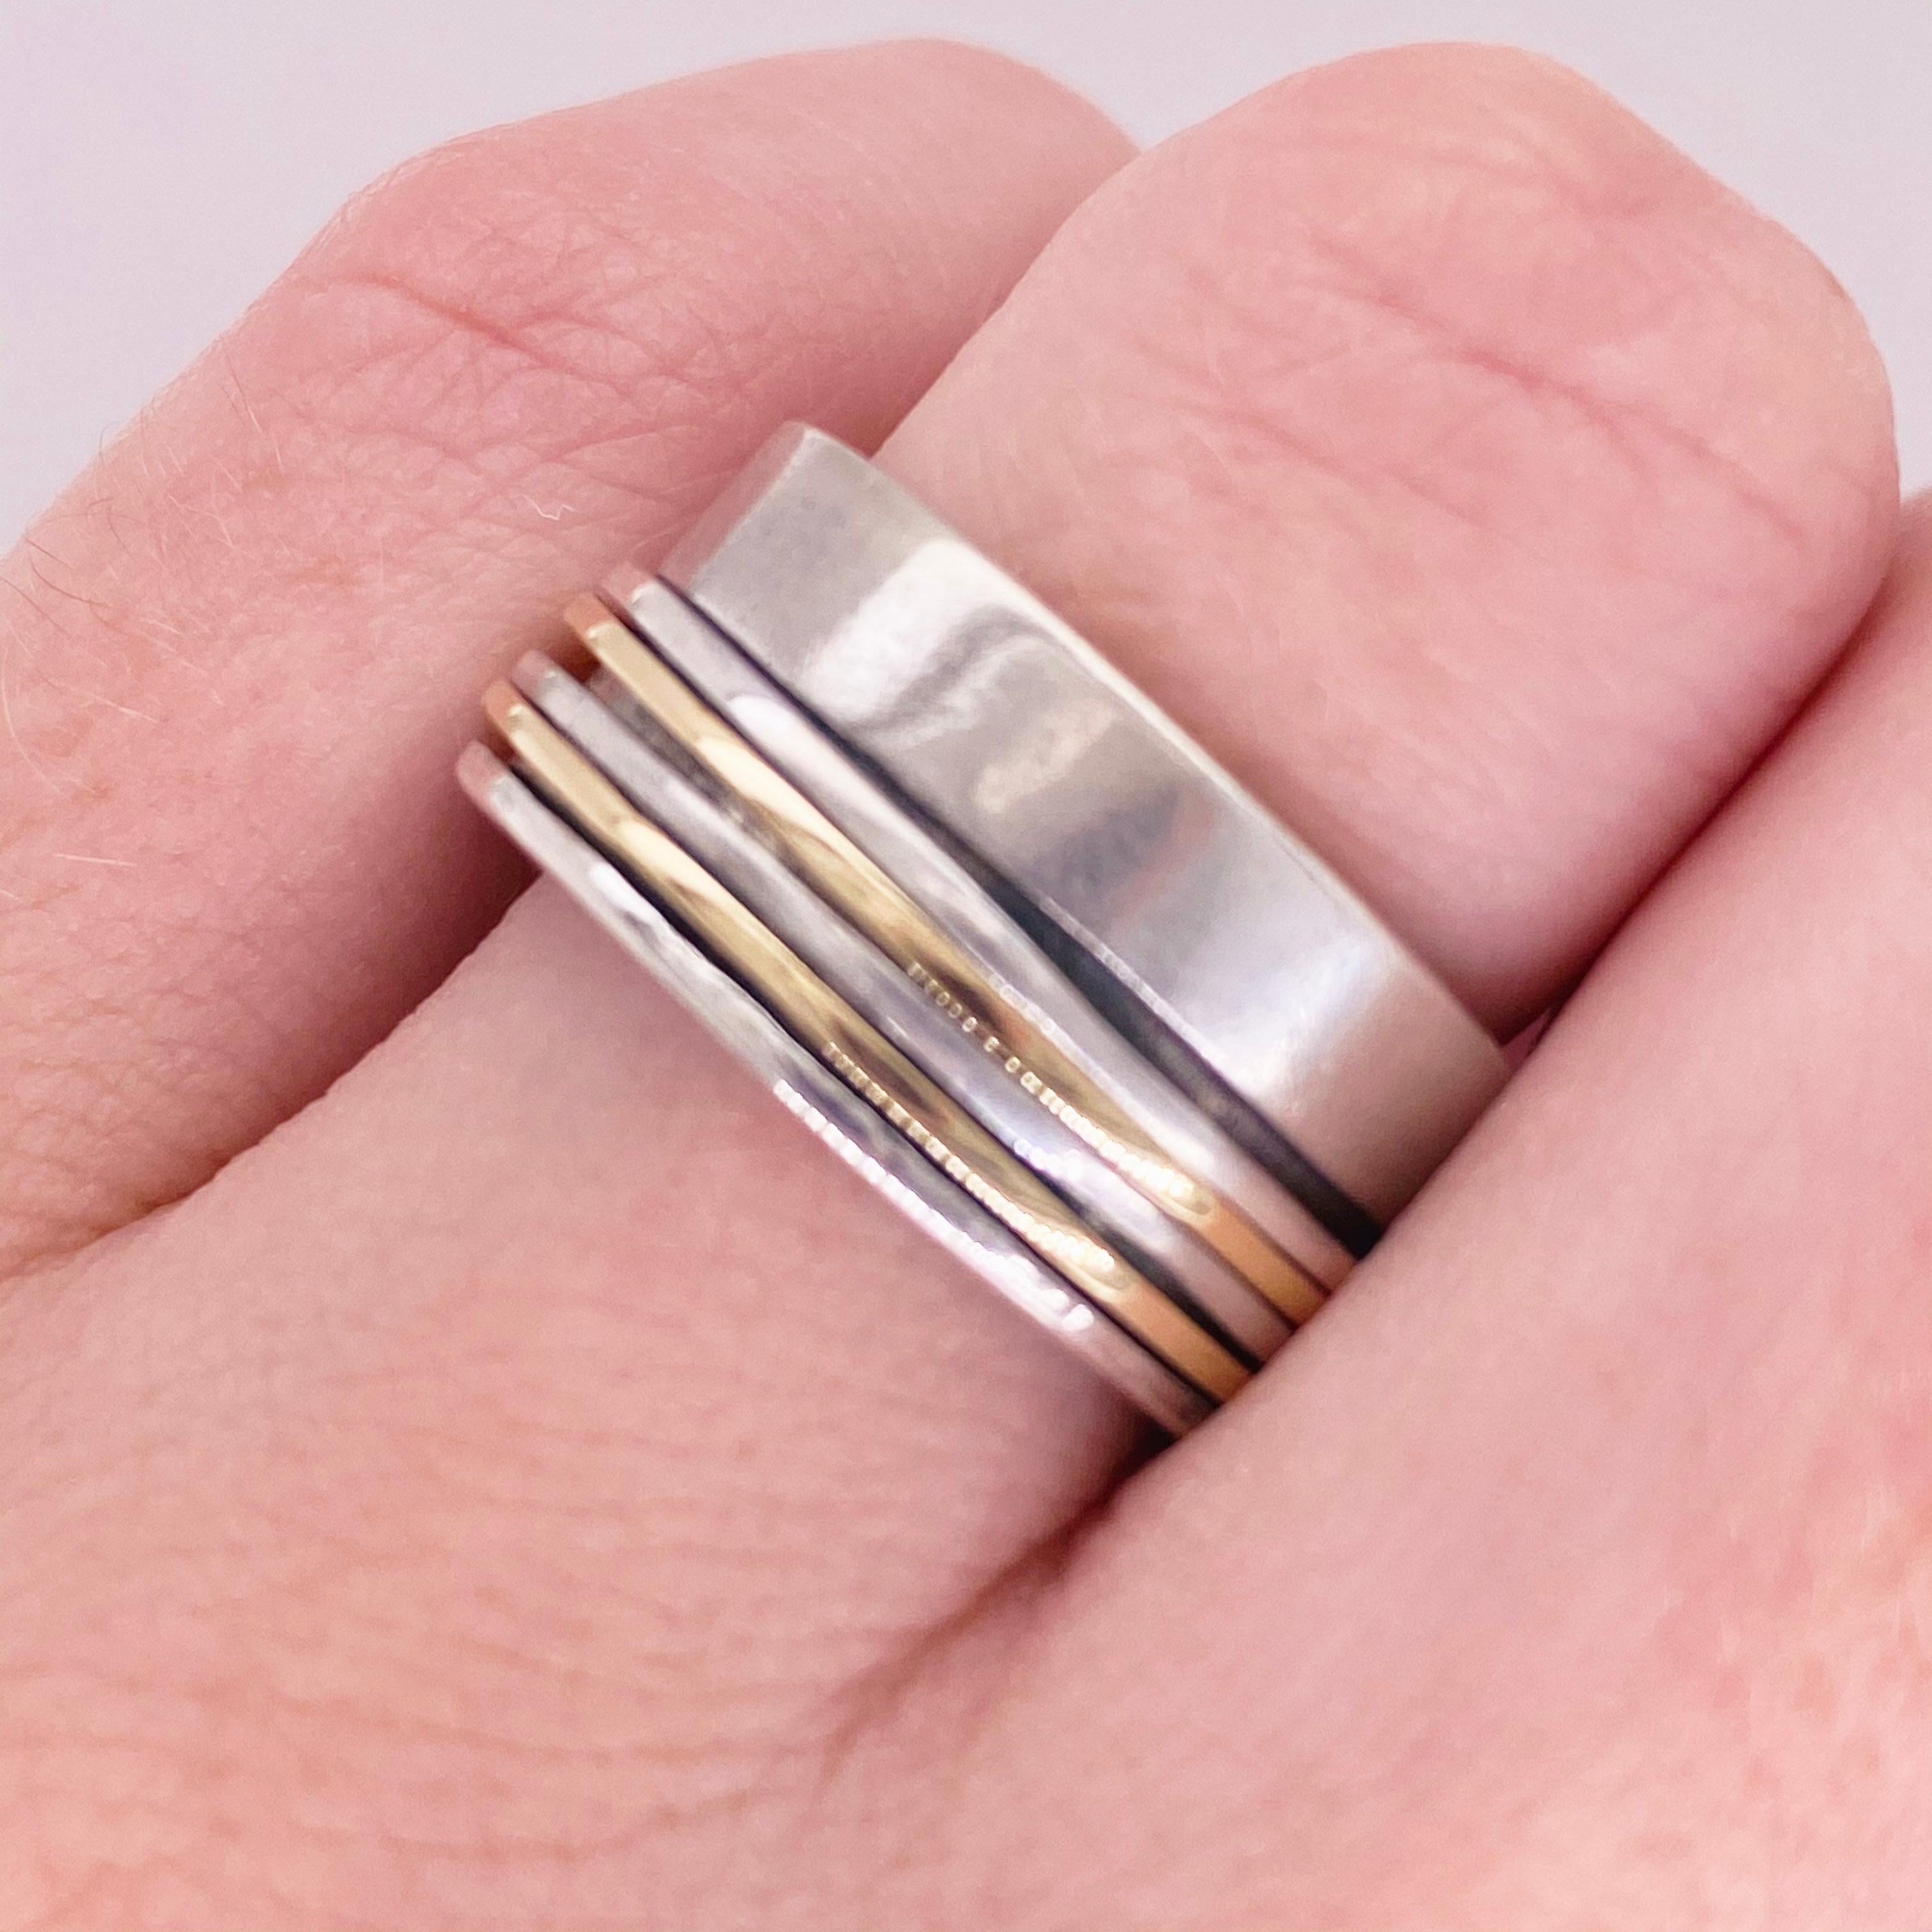 This slick 14Kt gold and sterling silver band ring isn't just a classy fashion statement, it's also great for fidgeters! The solid gold and silver bands spin around their polished silver base. Spinner rings are designed to be fiddled with. They're a